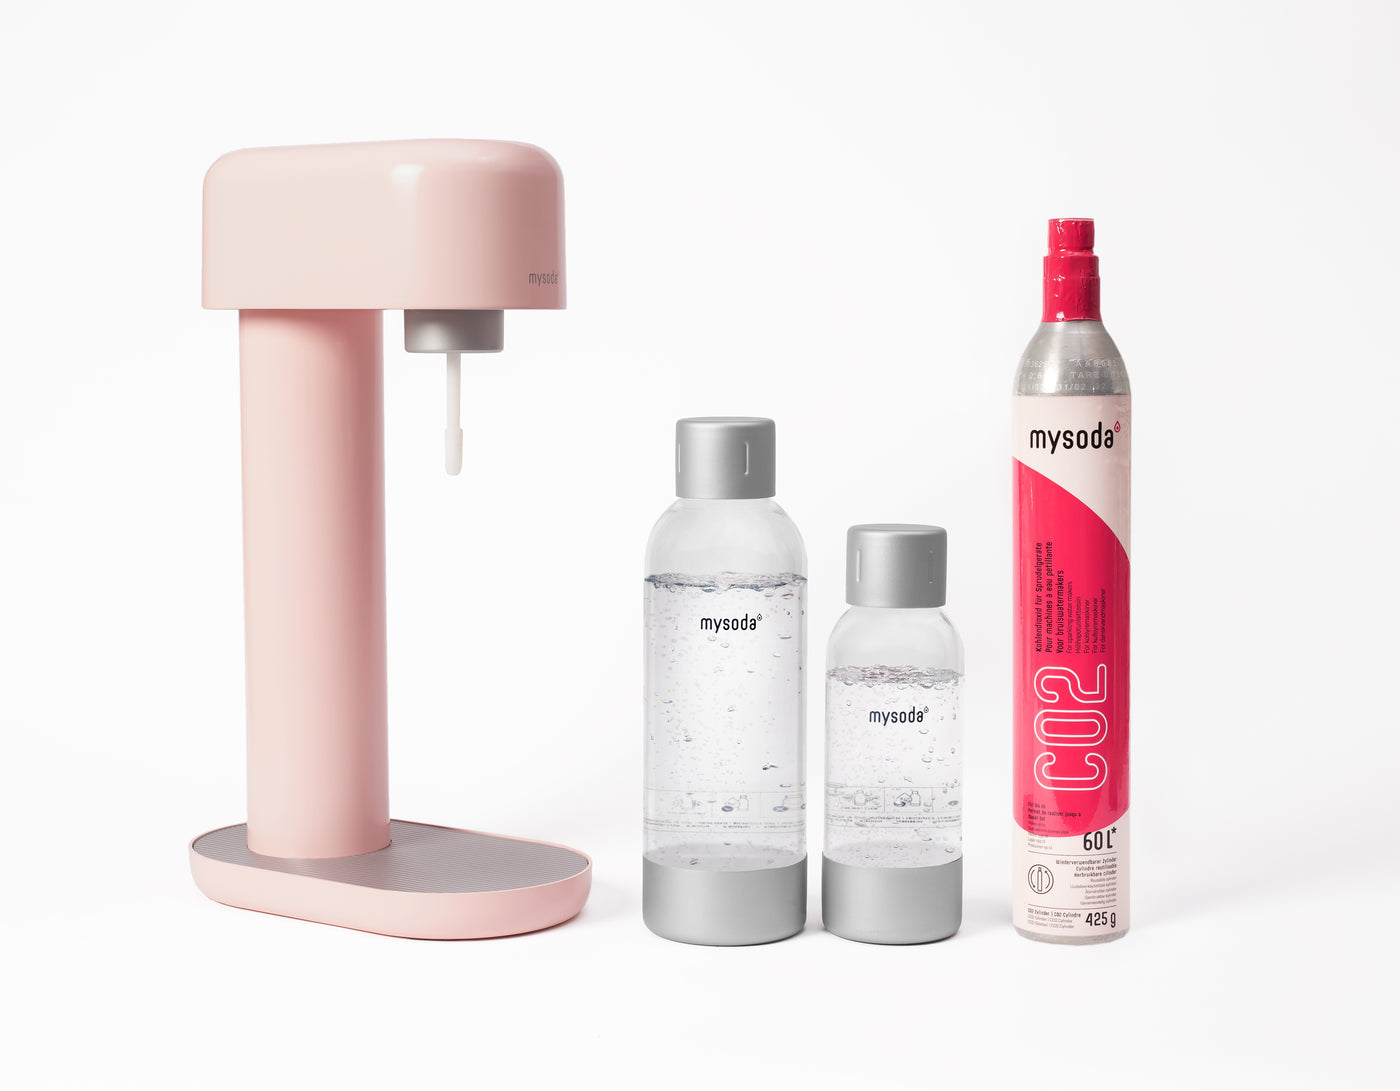 A pink Ruby sparkling water maker with bottle and co2 cylinder